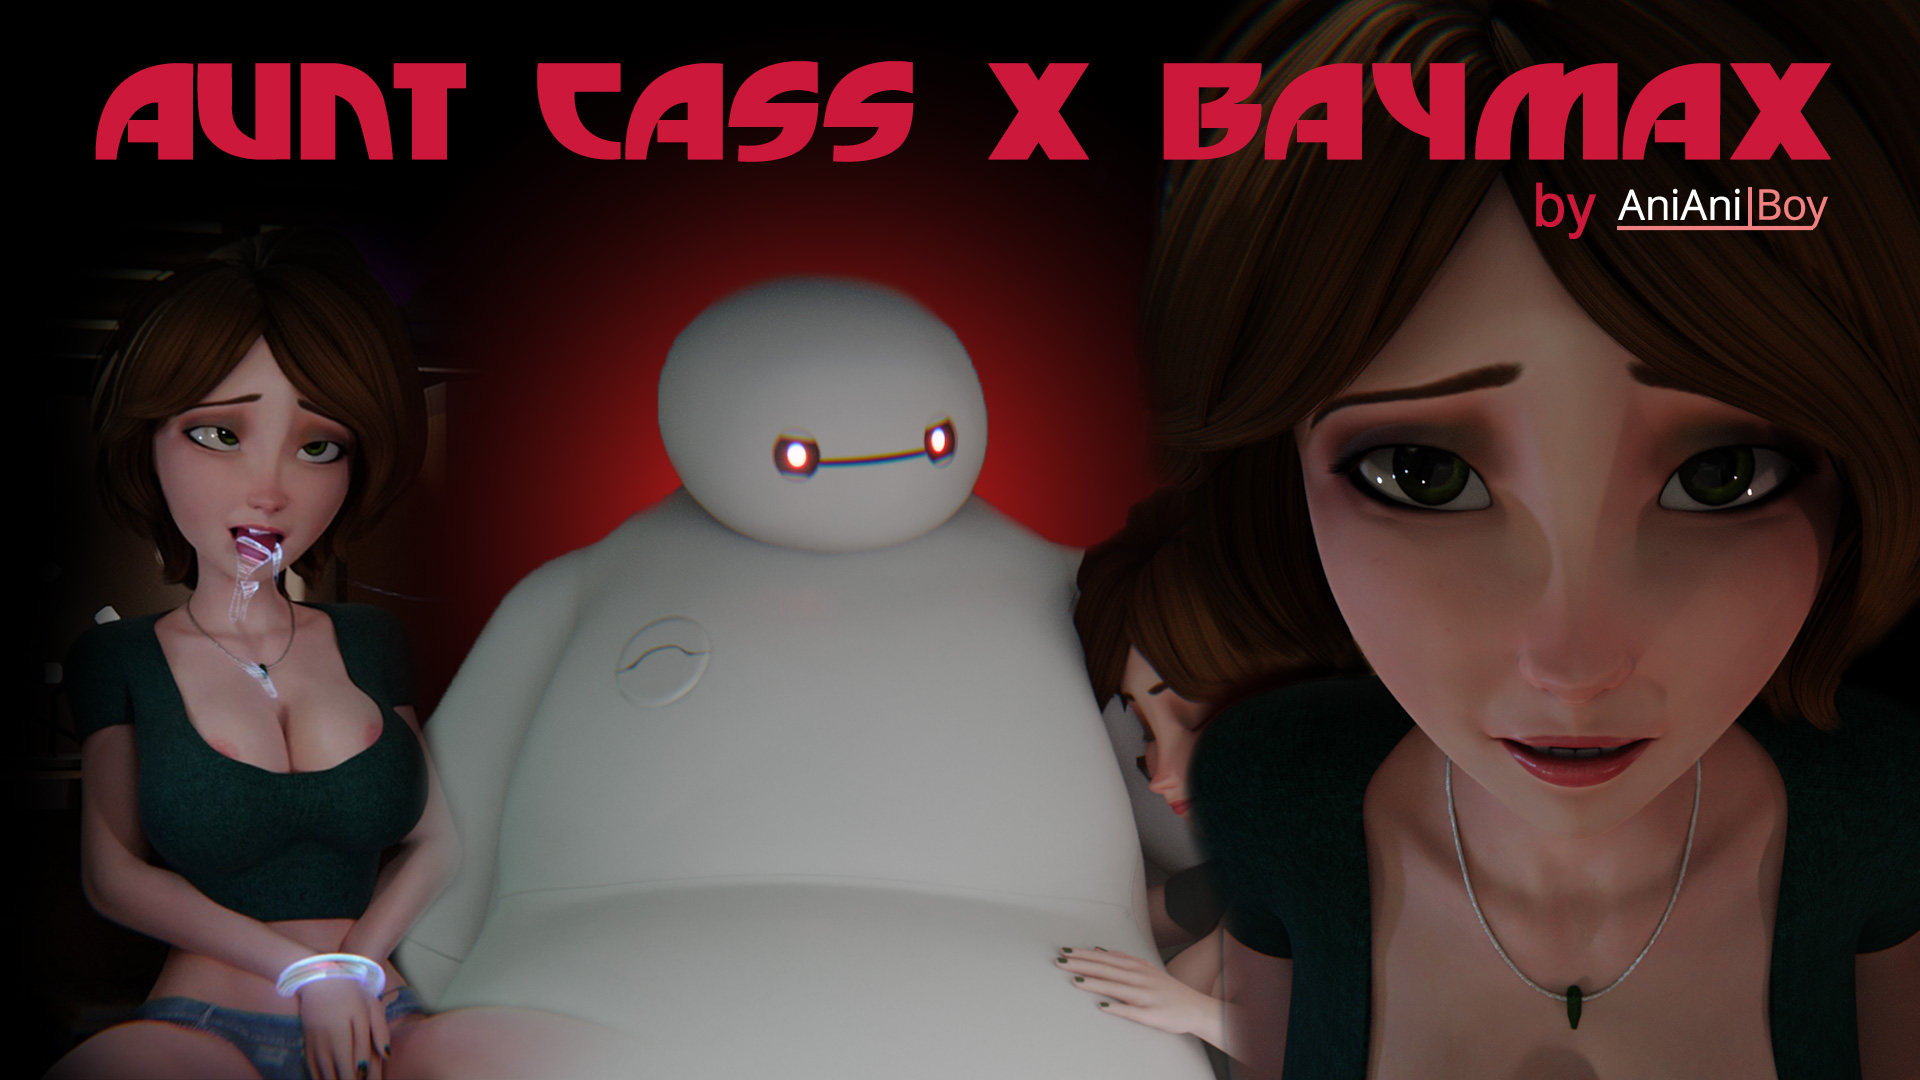 Aunt cass and baymax [anianiboy]